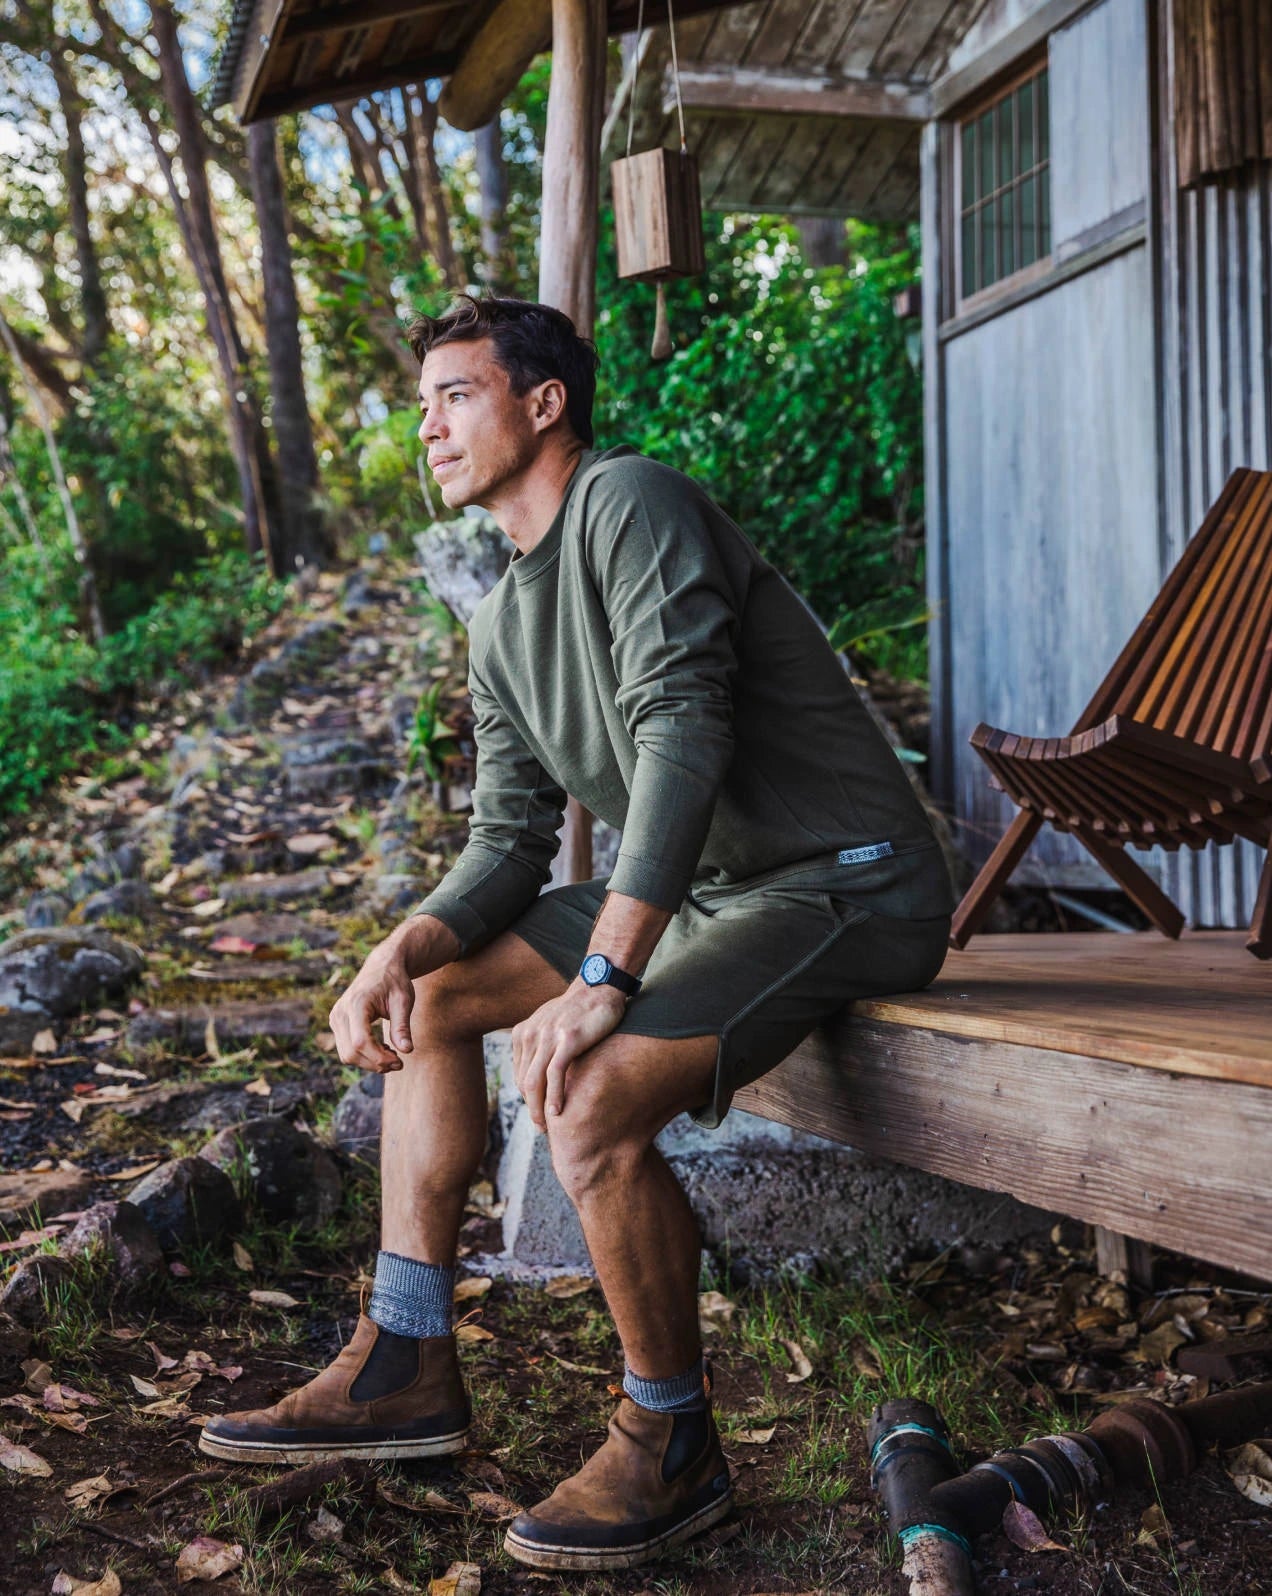 A guy standing in front of a wooden house, wearing our alpaca Terry garments in green